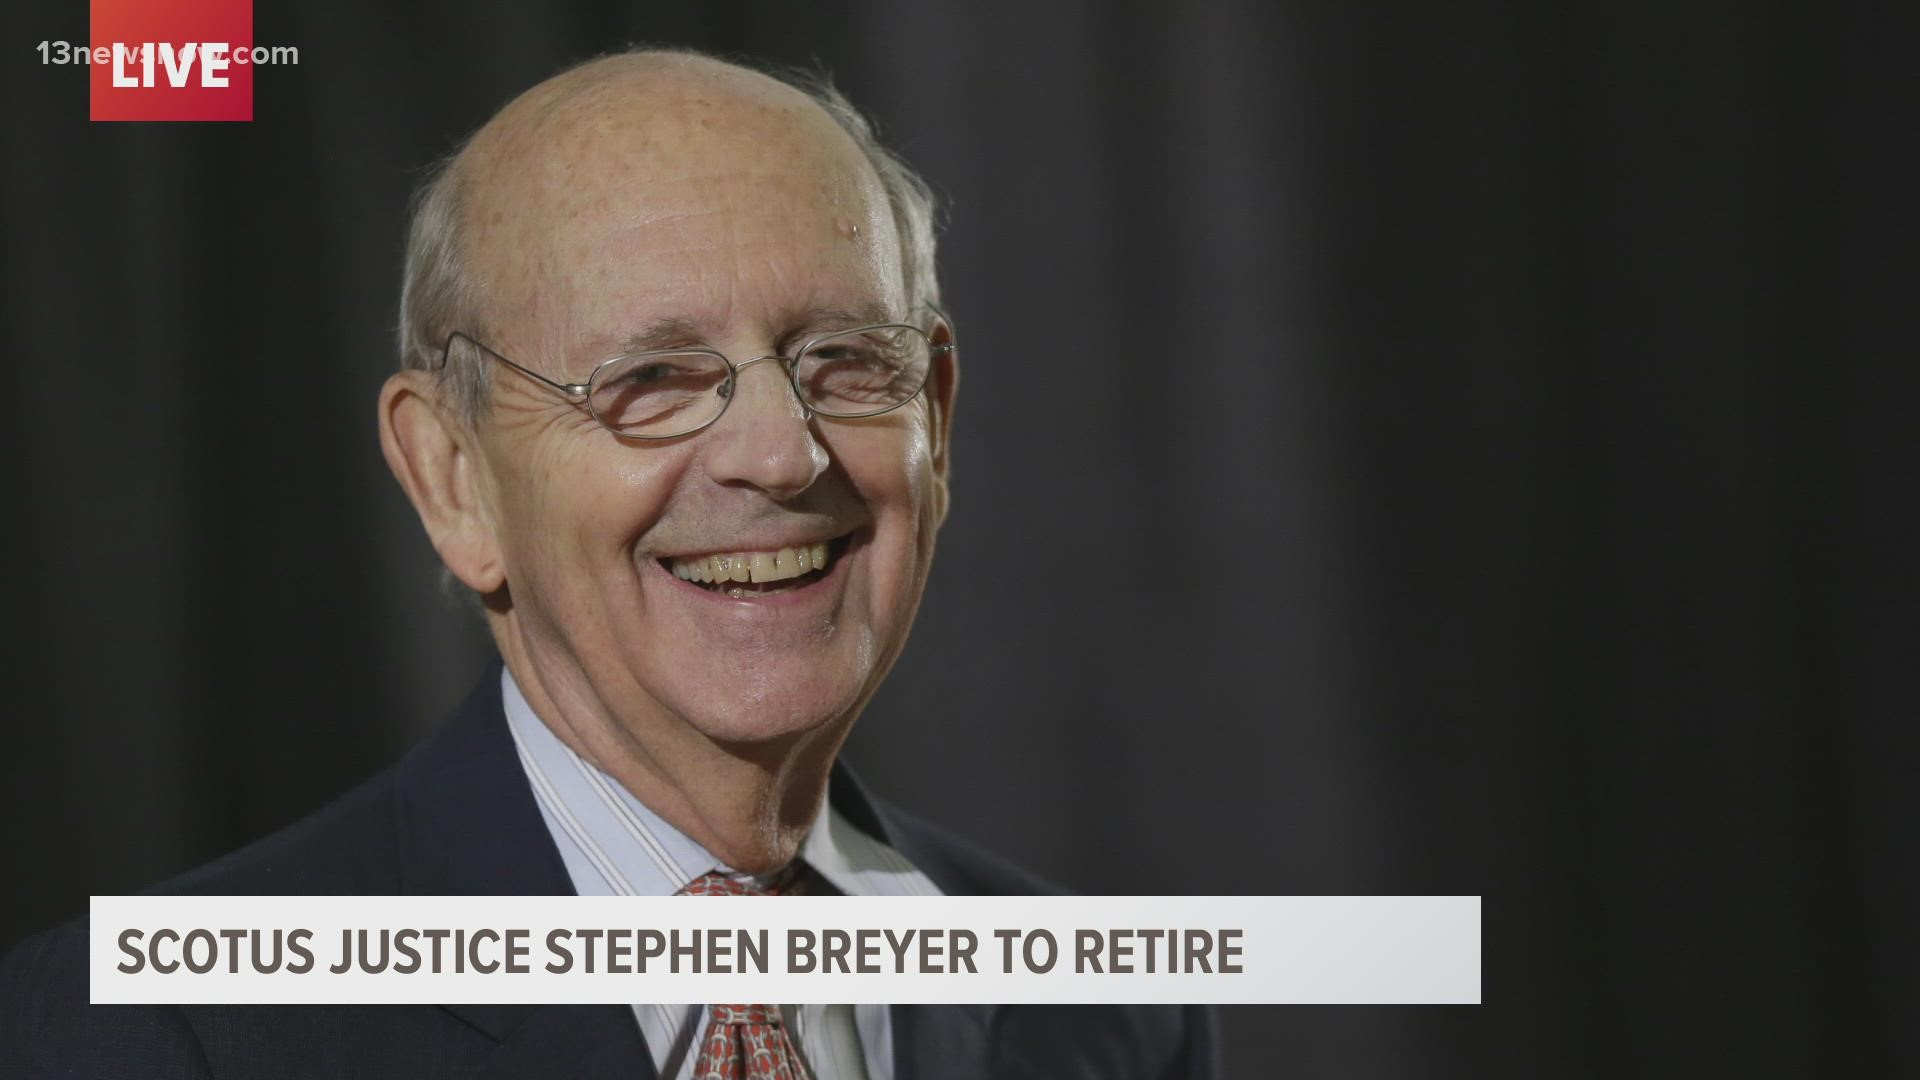 The oldest U.S. Supreme Court Justice Stephen Breyer says he's retiring. He was nominated 27 years ago by Bill Clinton.